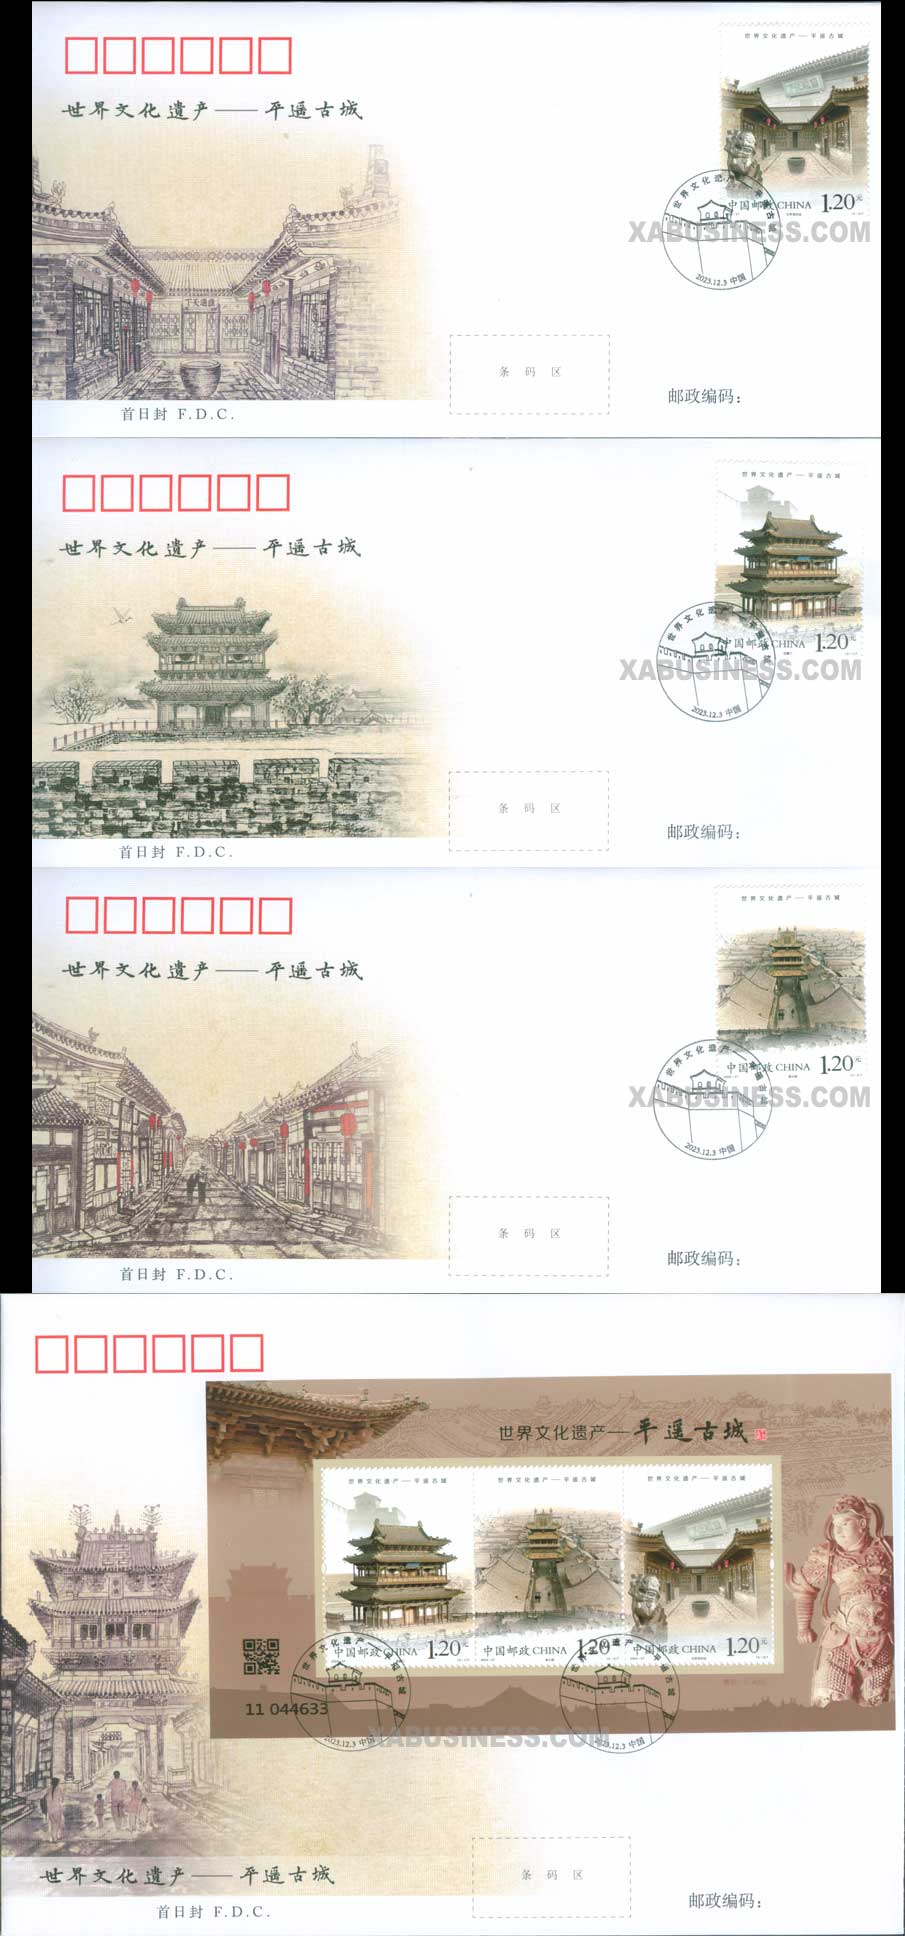 Cultural World Heritage - Ancient City of Pingyao (FDC)